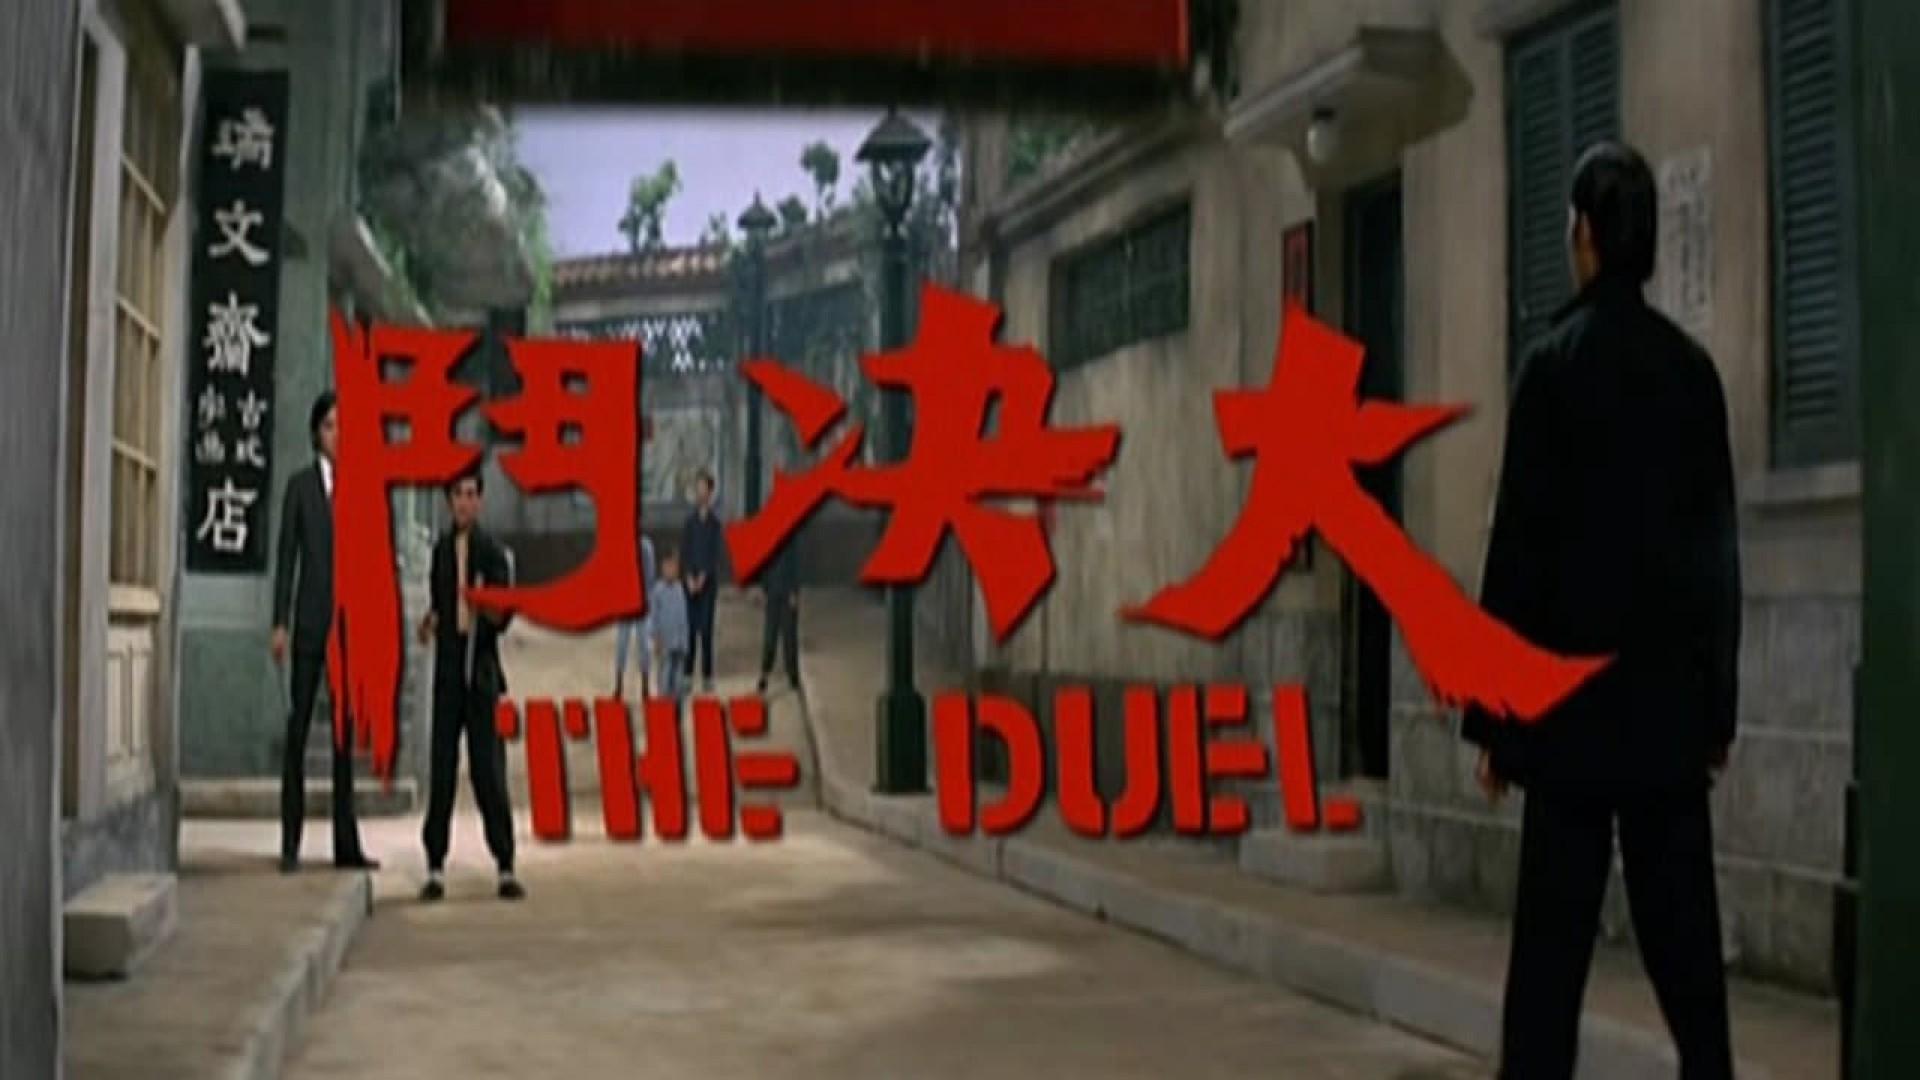 Duel of the Iron Fist